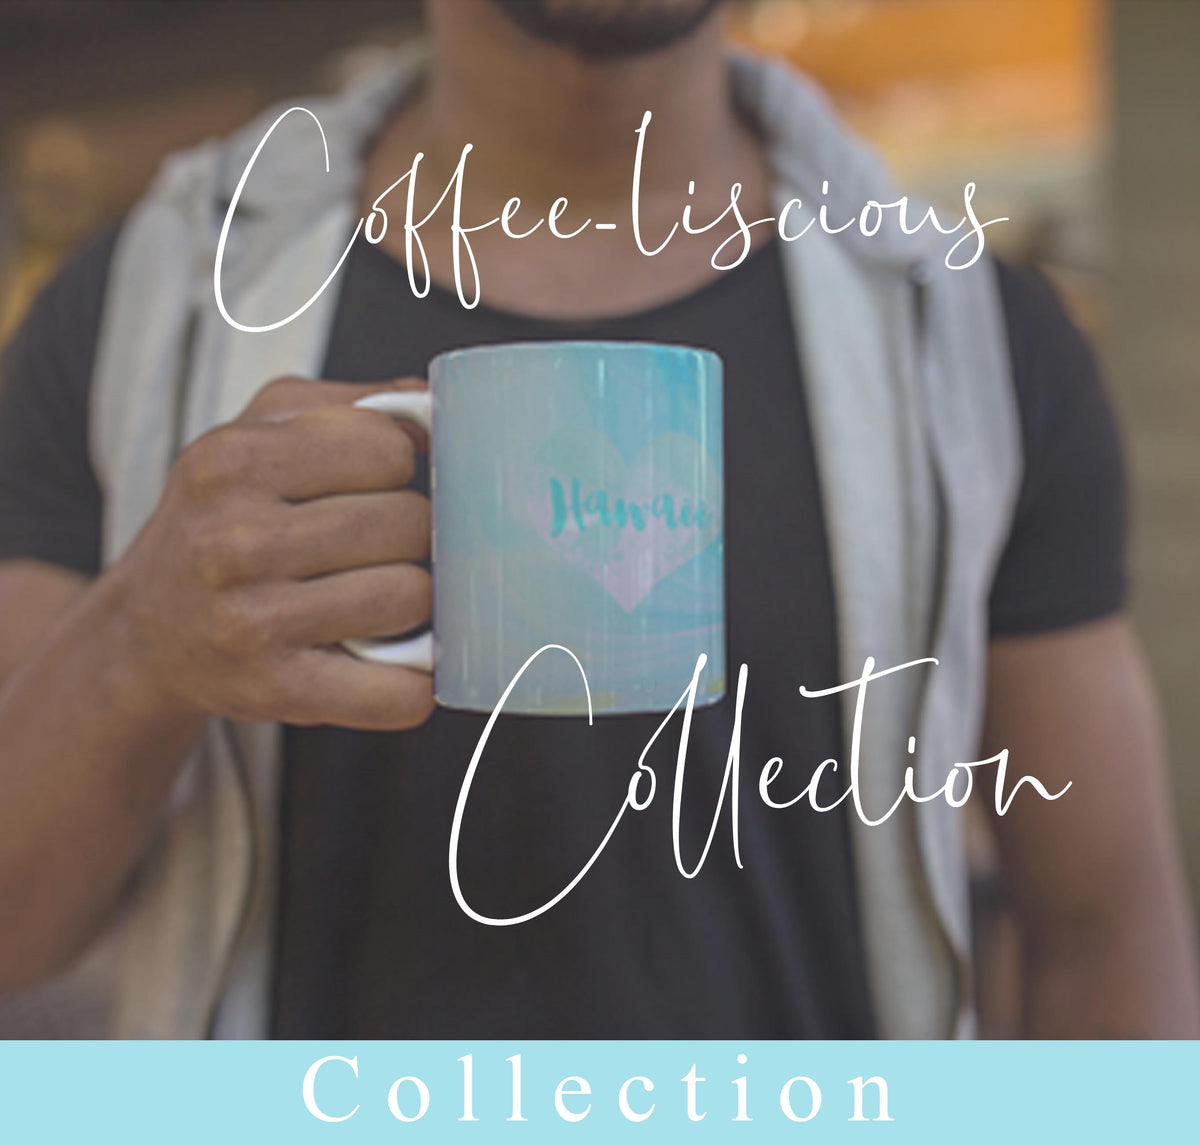 Coffee Liscious Collection Image